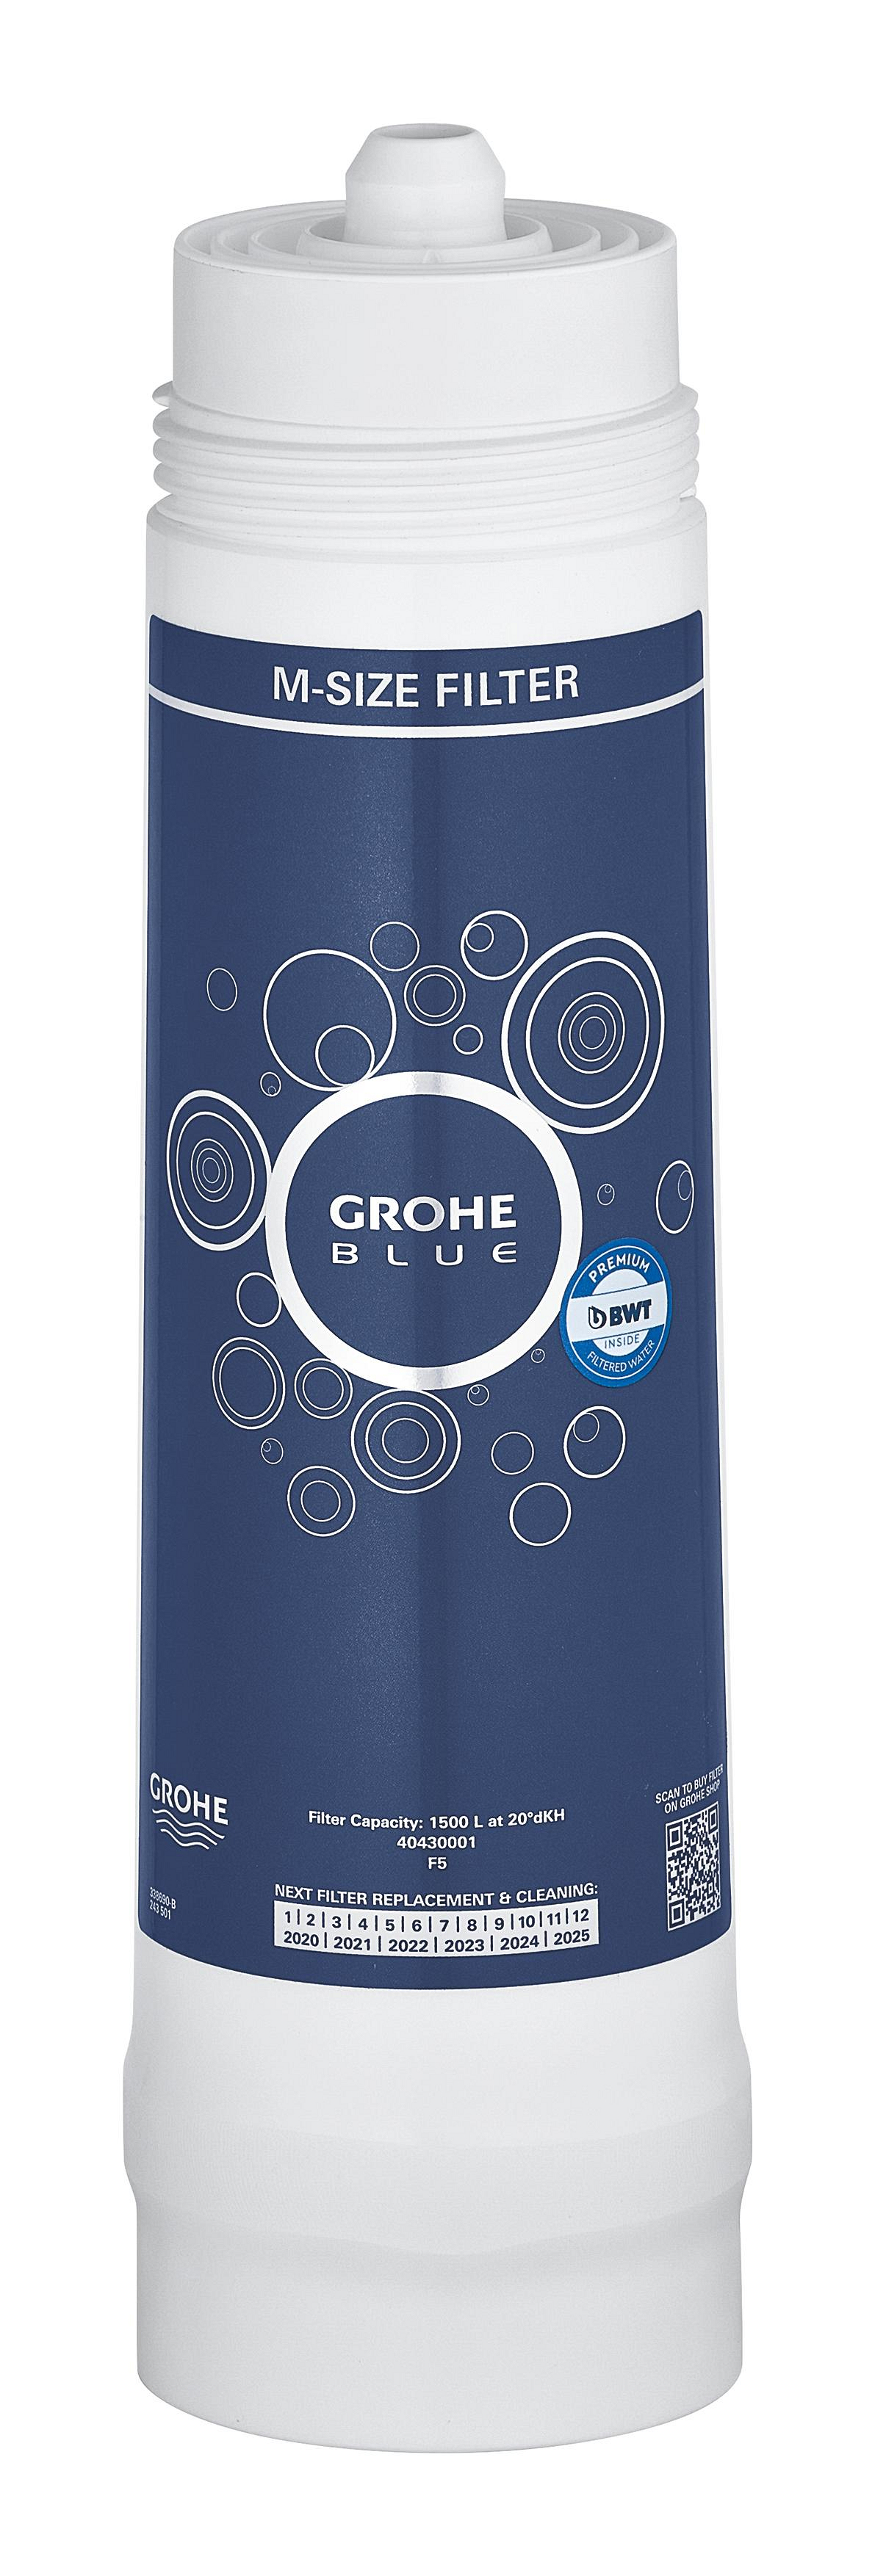 GROHE Blue Filter M-Size 1500L